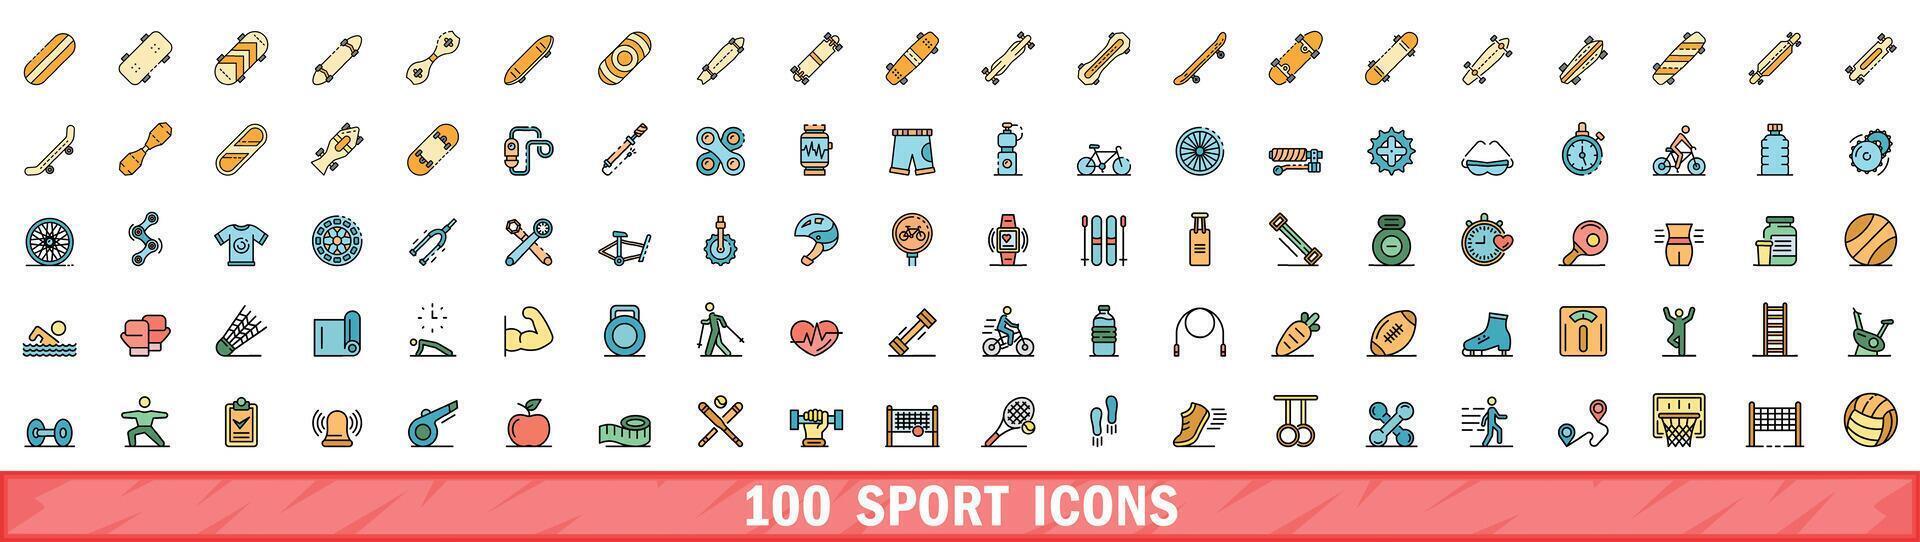 100 sport icons set, color line style vector